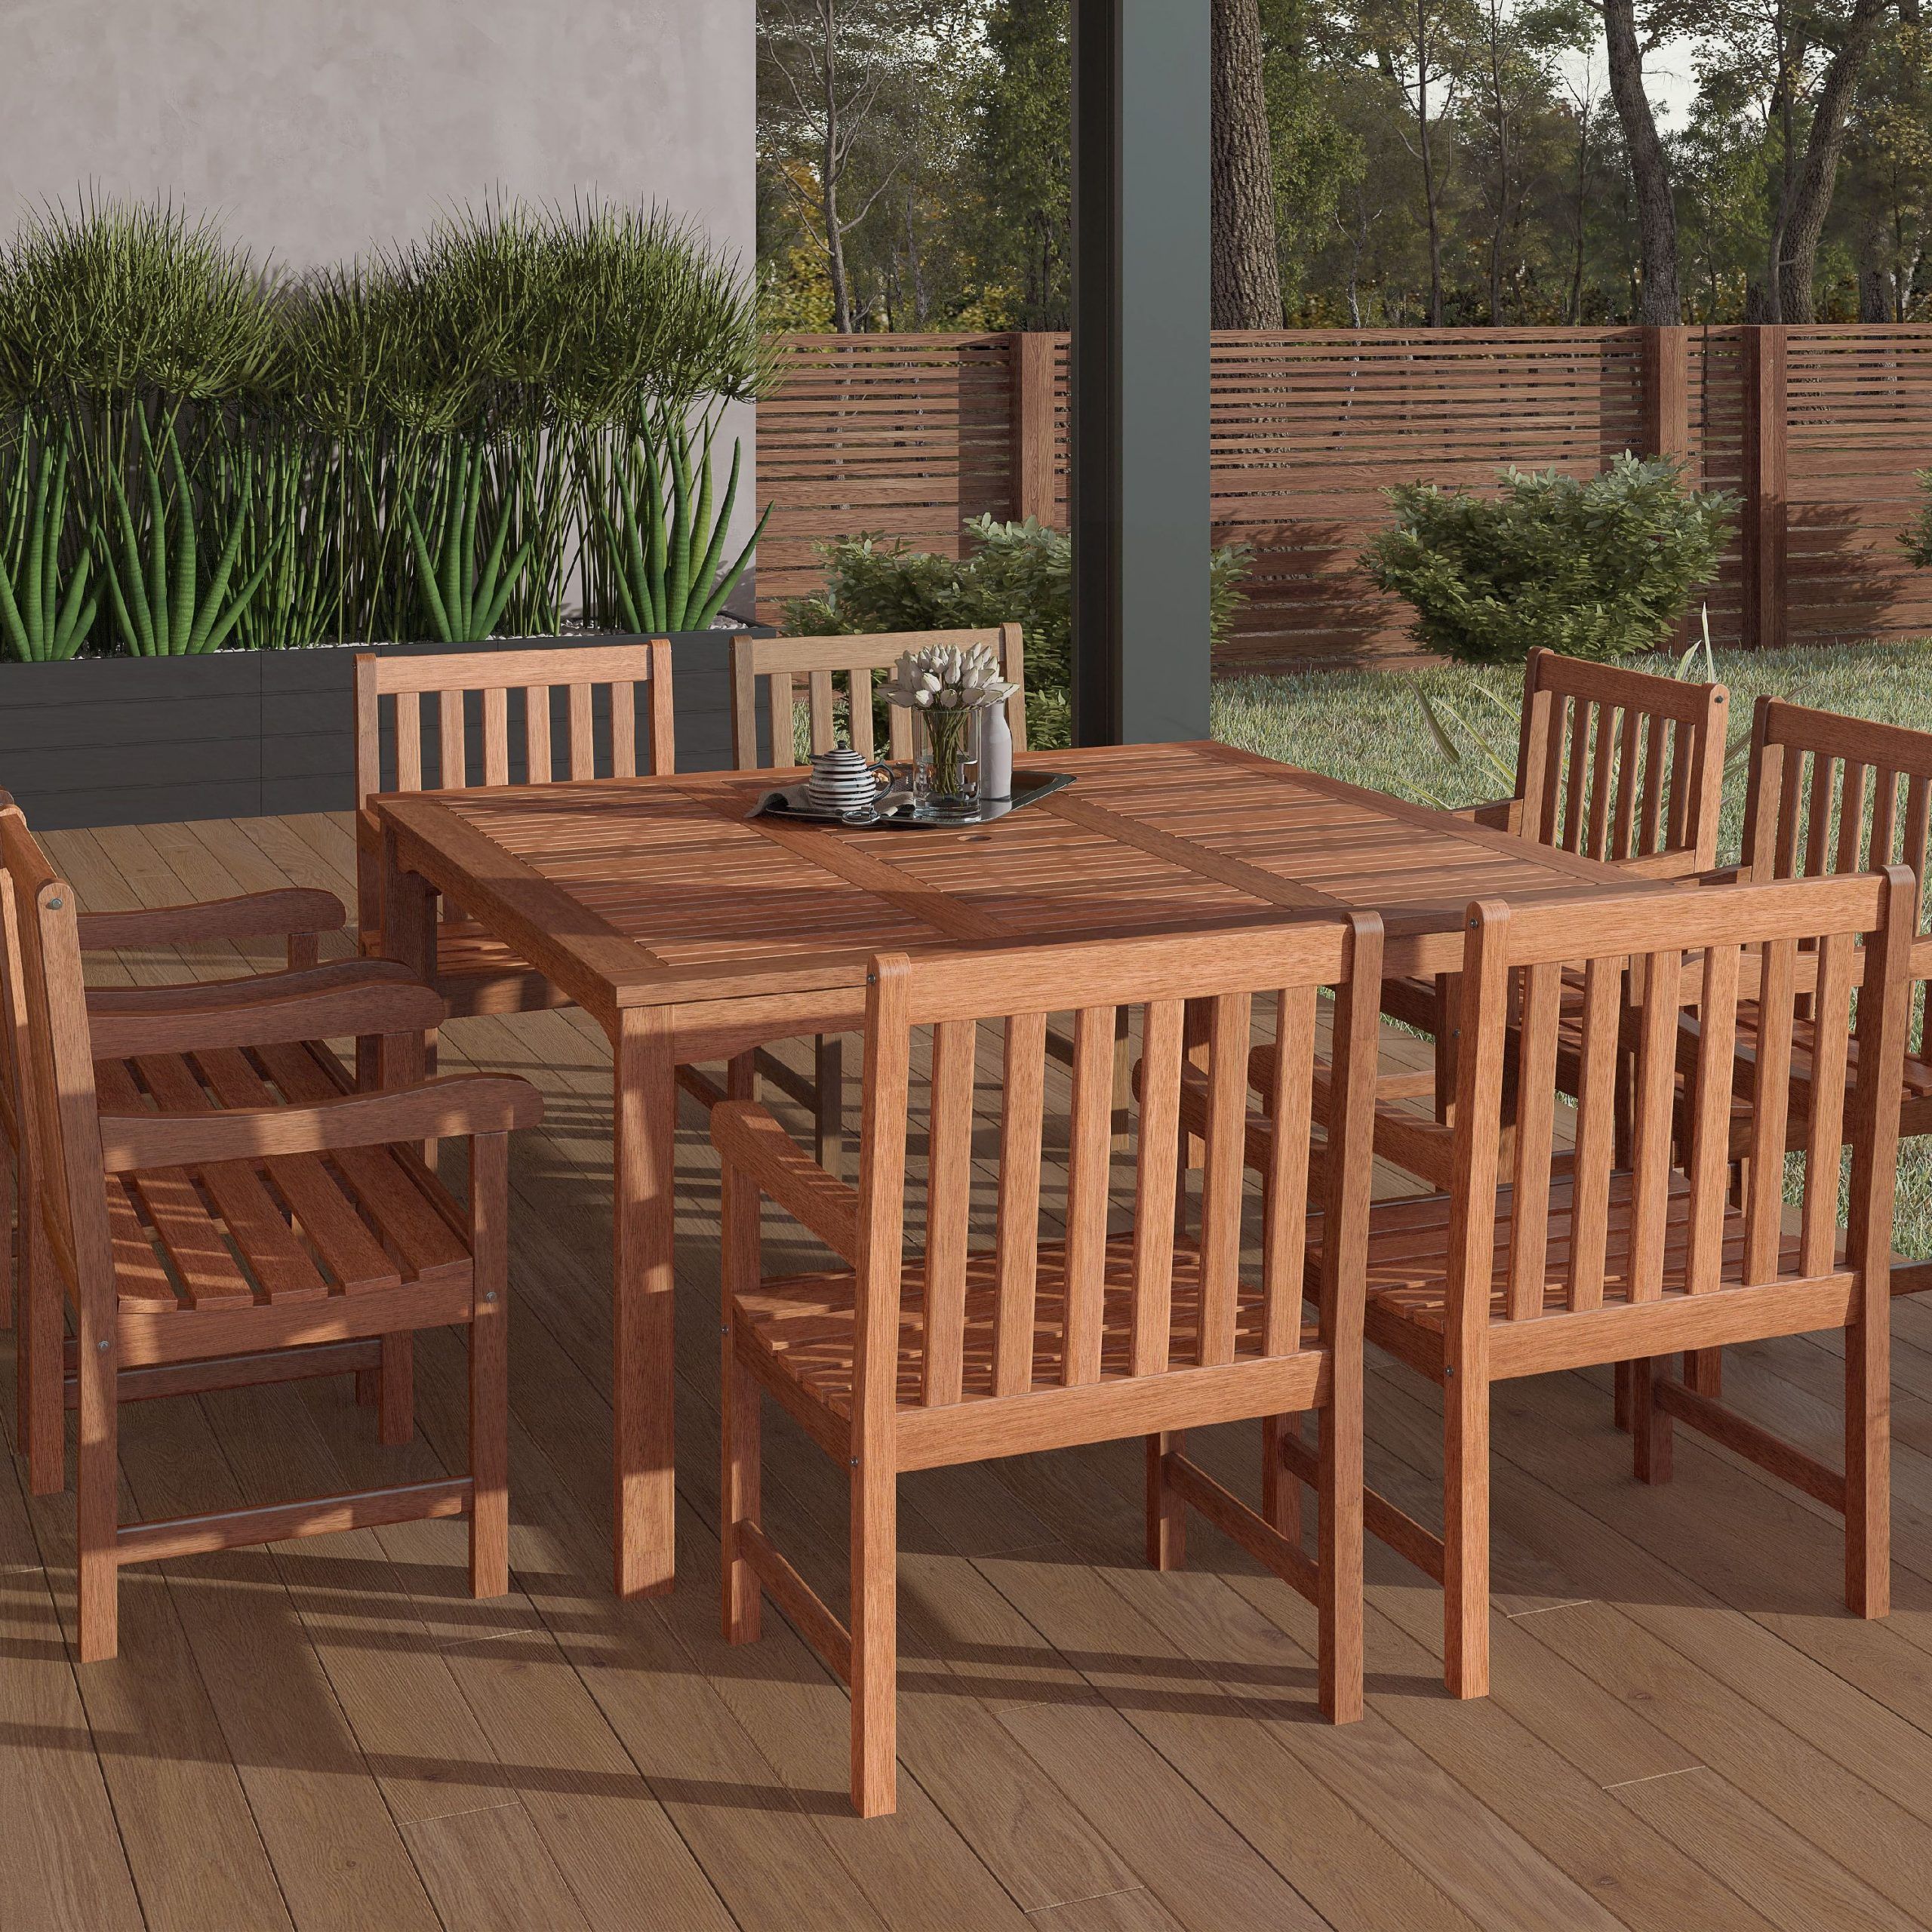 Amazonia Milano 9 Piece Square Patio Dining Set | Eucalyptus Wood Inside Square 9 Piece Outdoor Dining Sets (View 4 of 15)